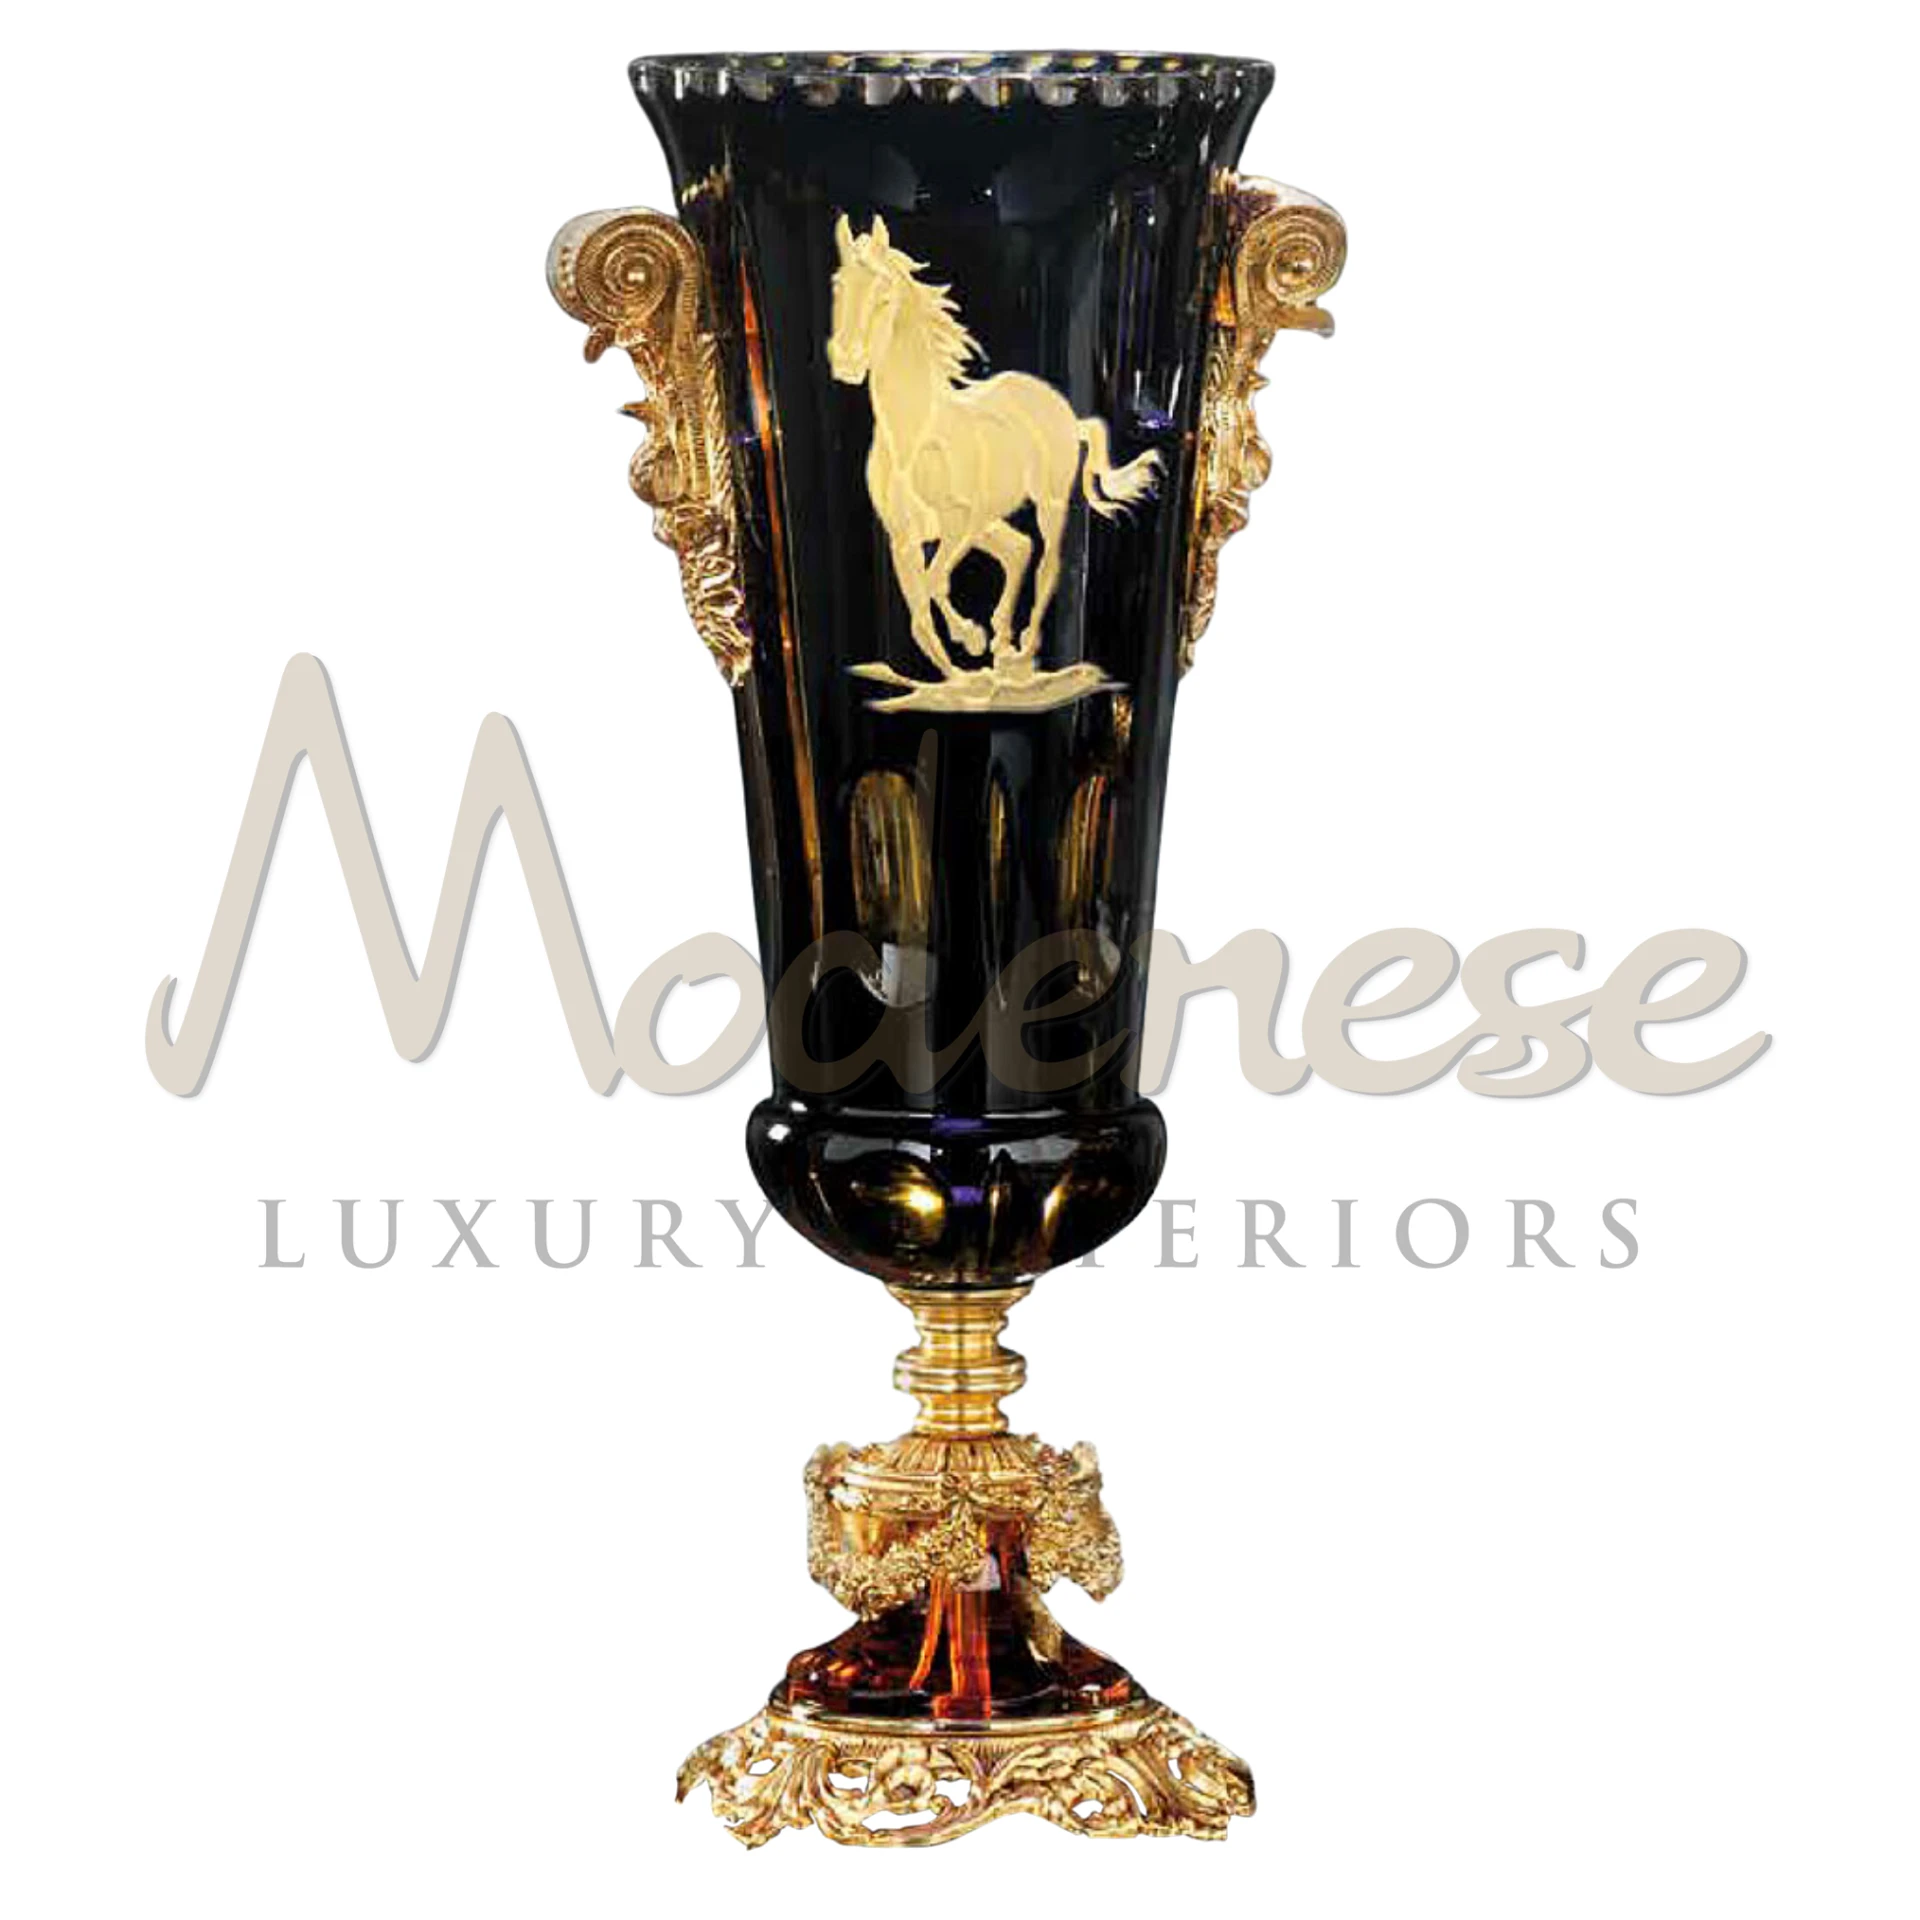 Classical Horse Ornamented Vase, with intricate designs, adding traditional elegance to luxury interior design.